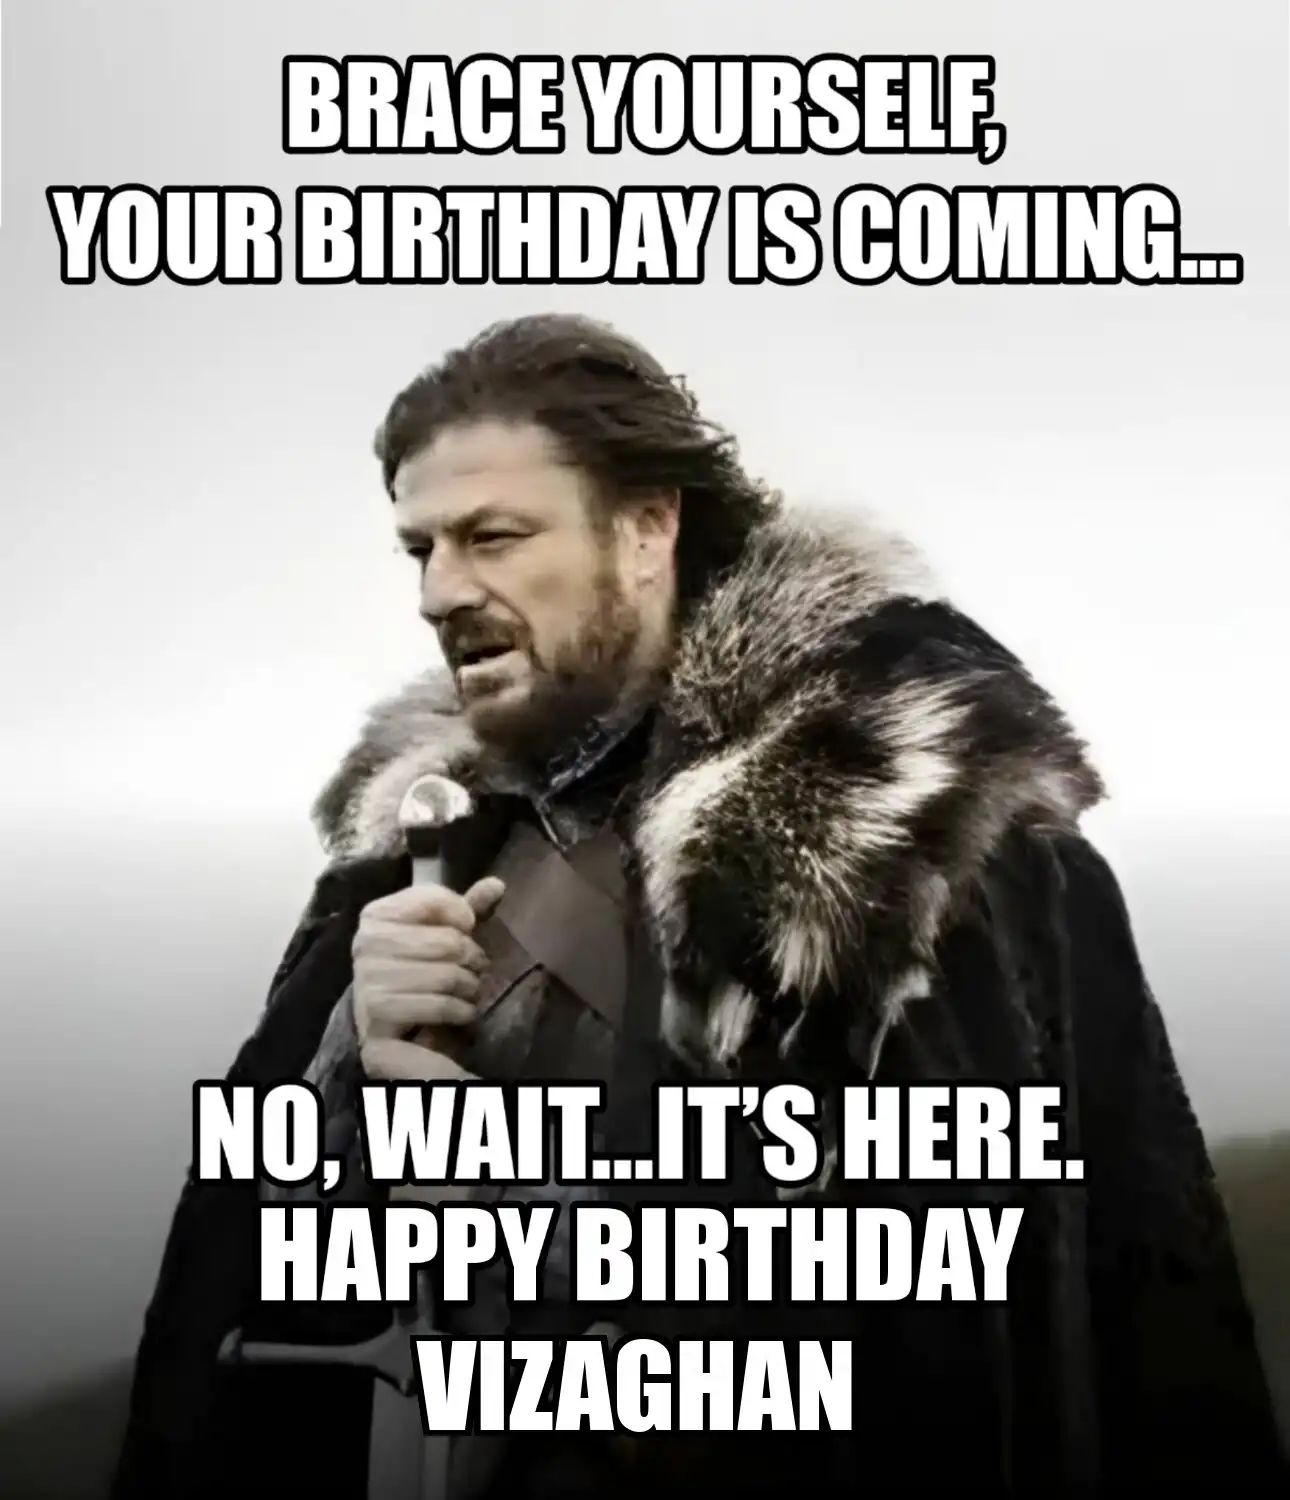 Happy Birthday Vizaghan Brace Yourself Your Birthday Is Coming Meme